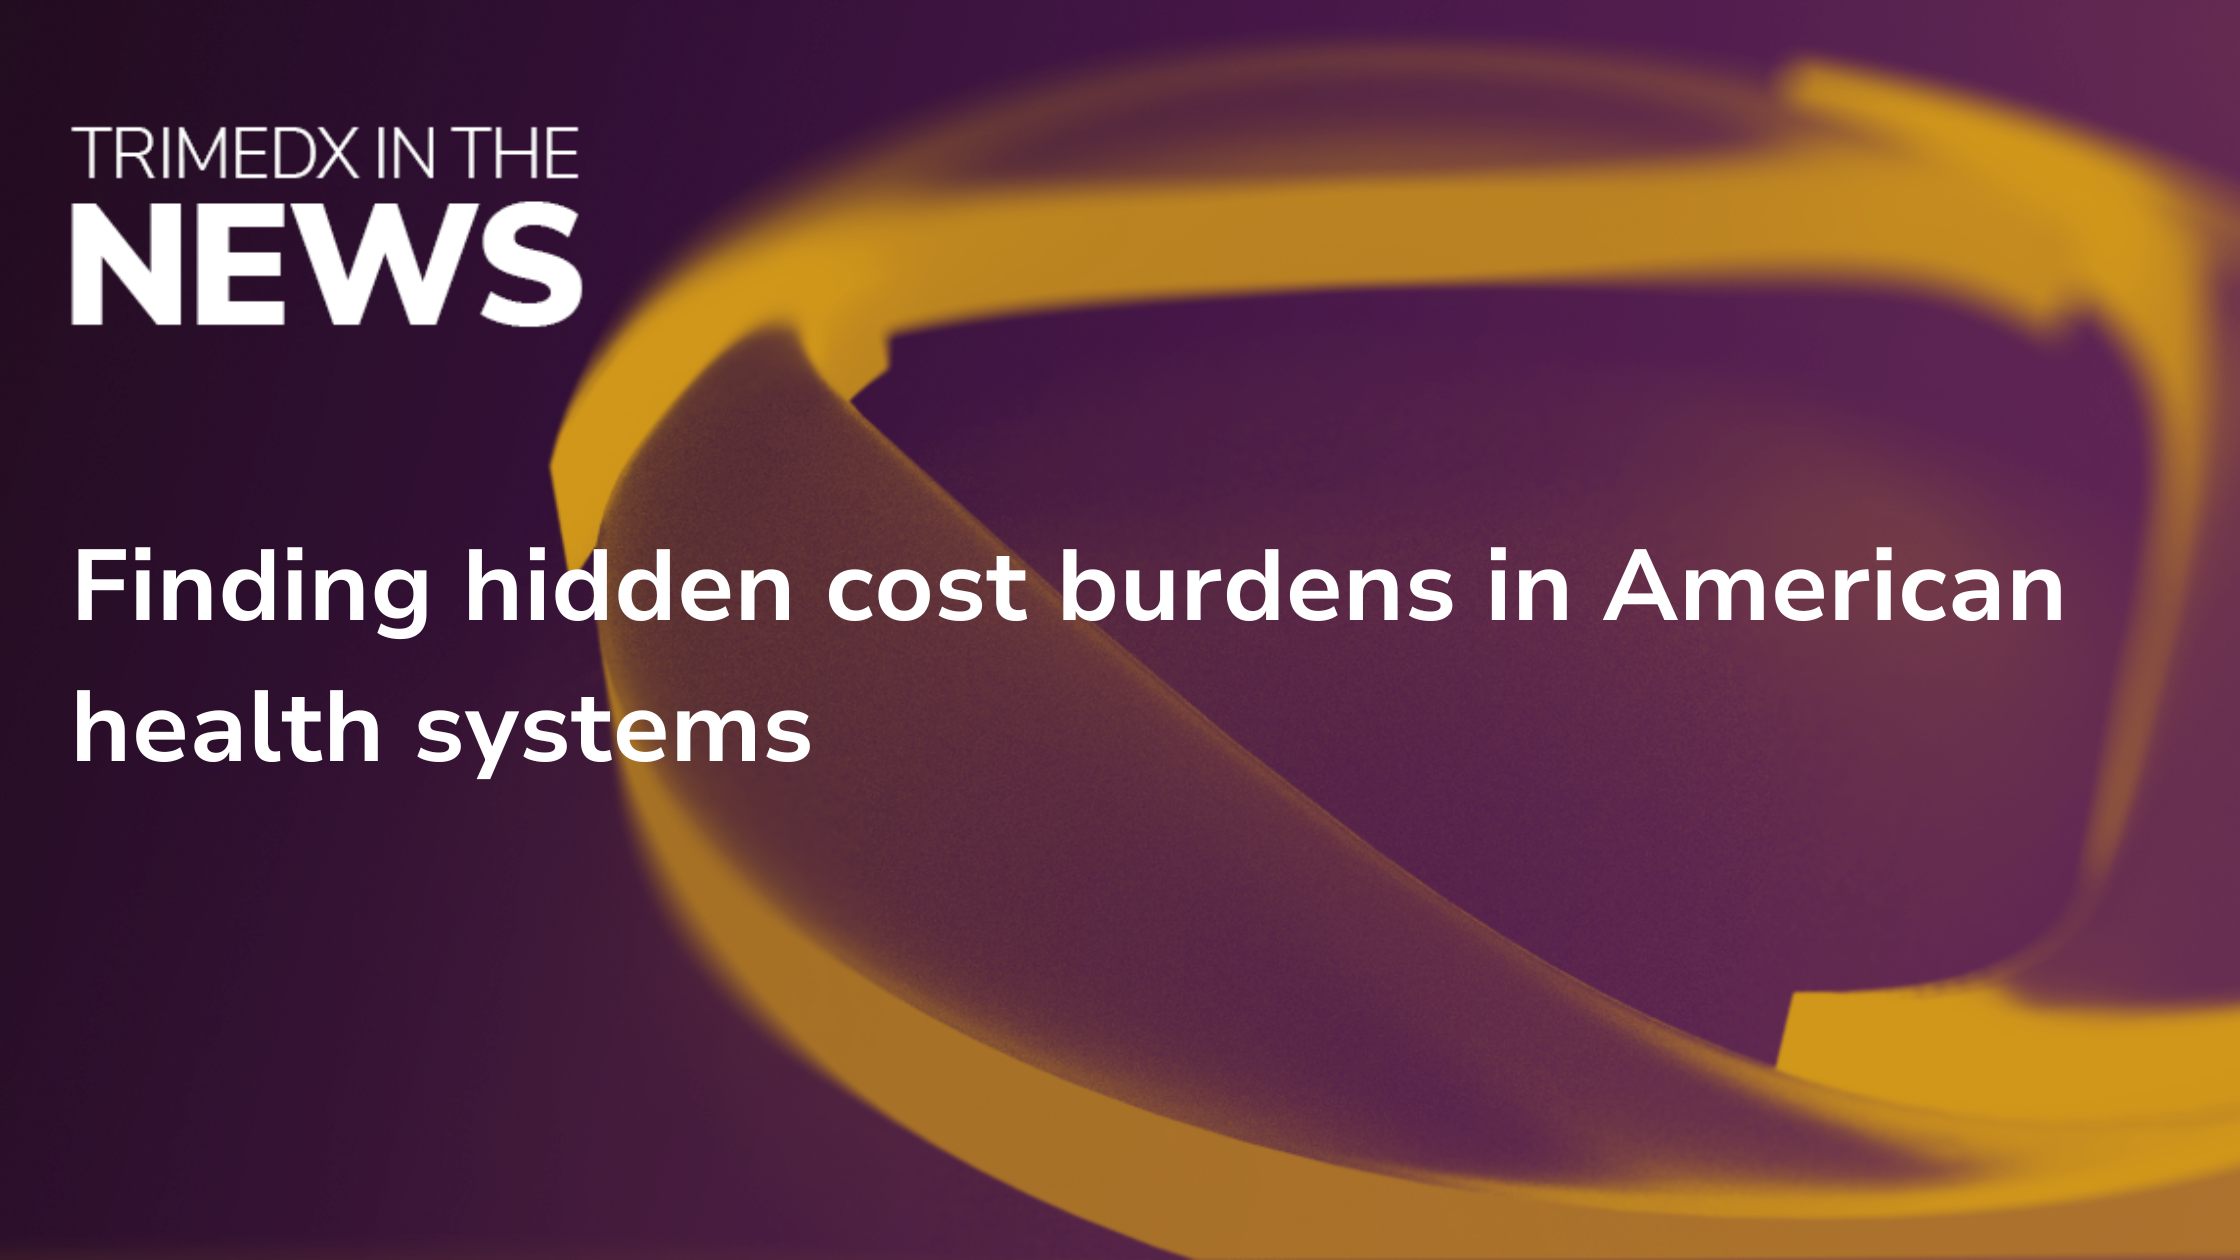 TRIMEDX in the News - Finding hidden cost burdens in American health systems  